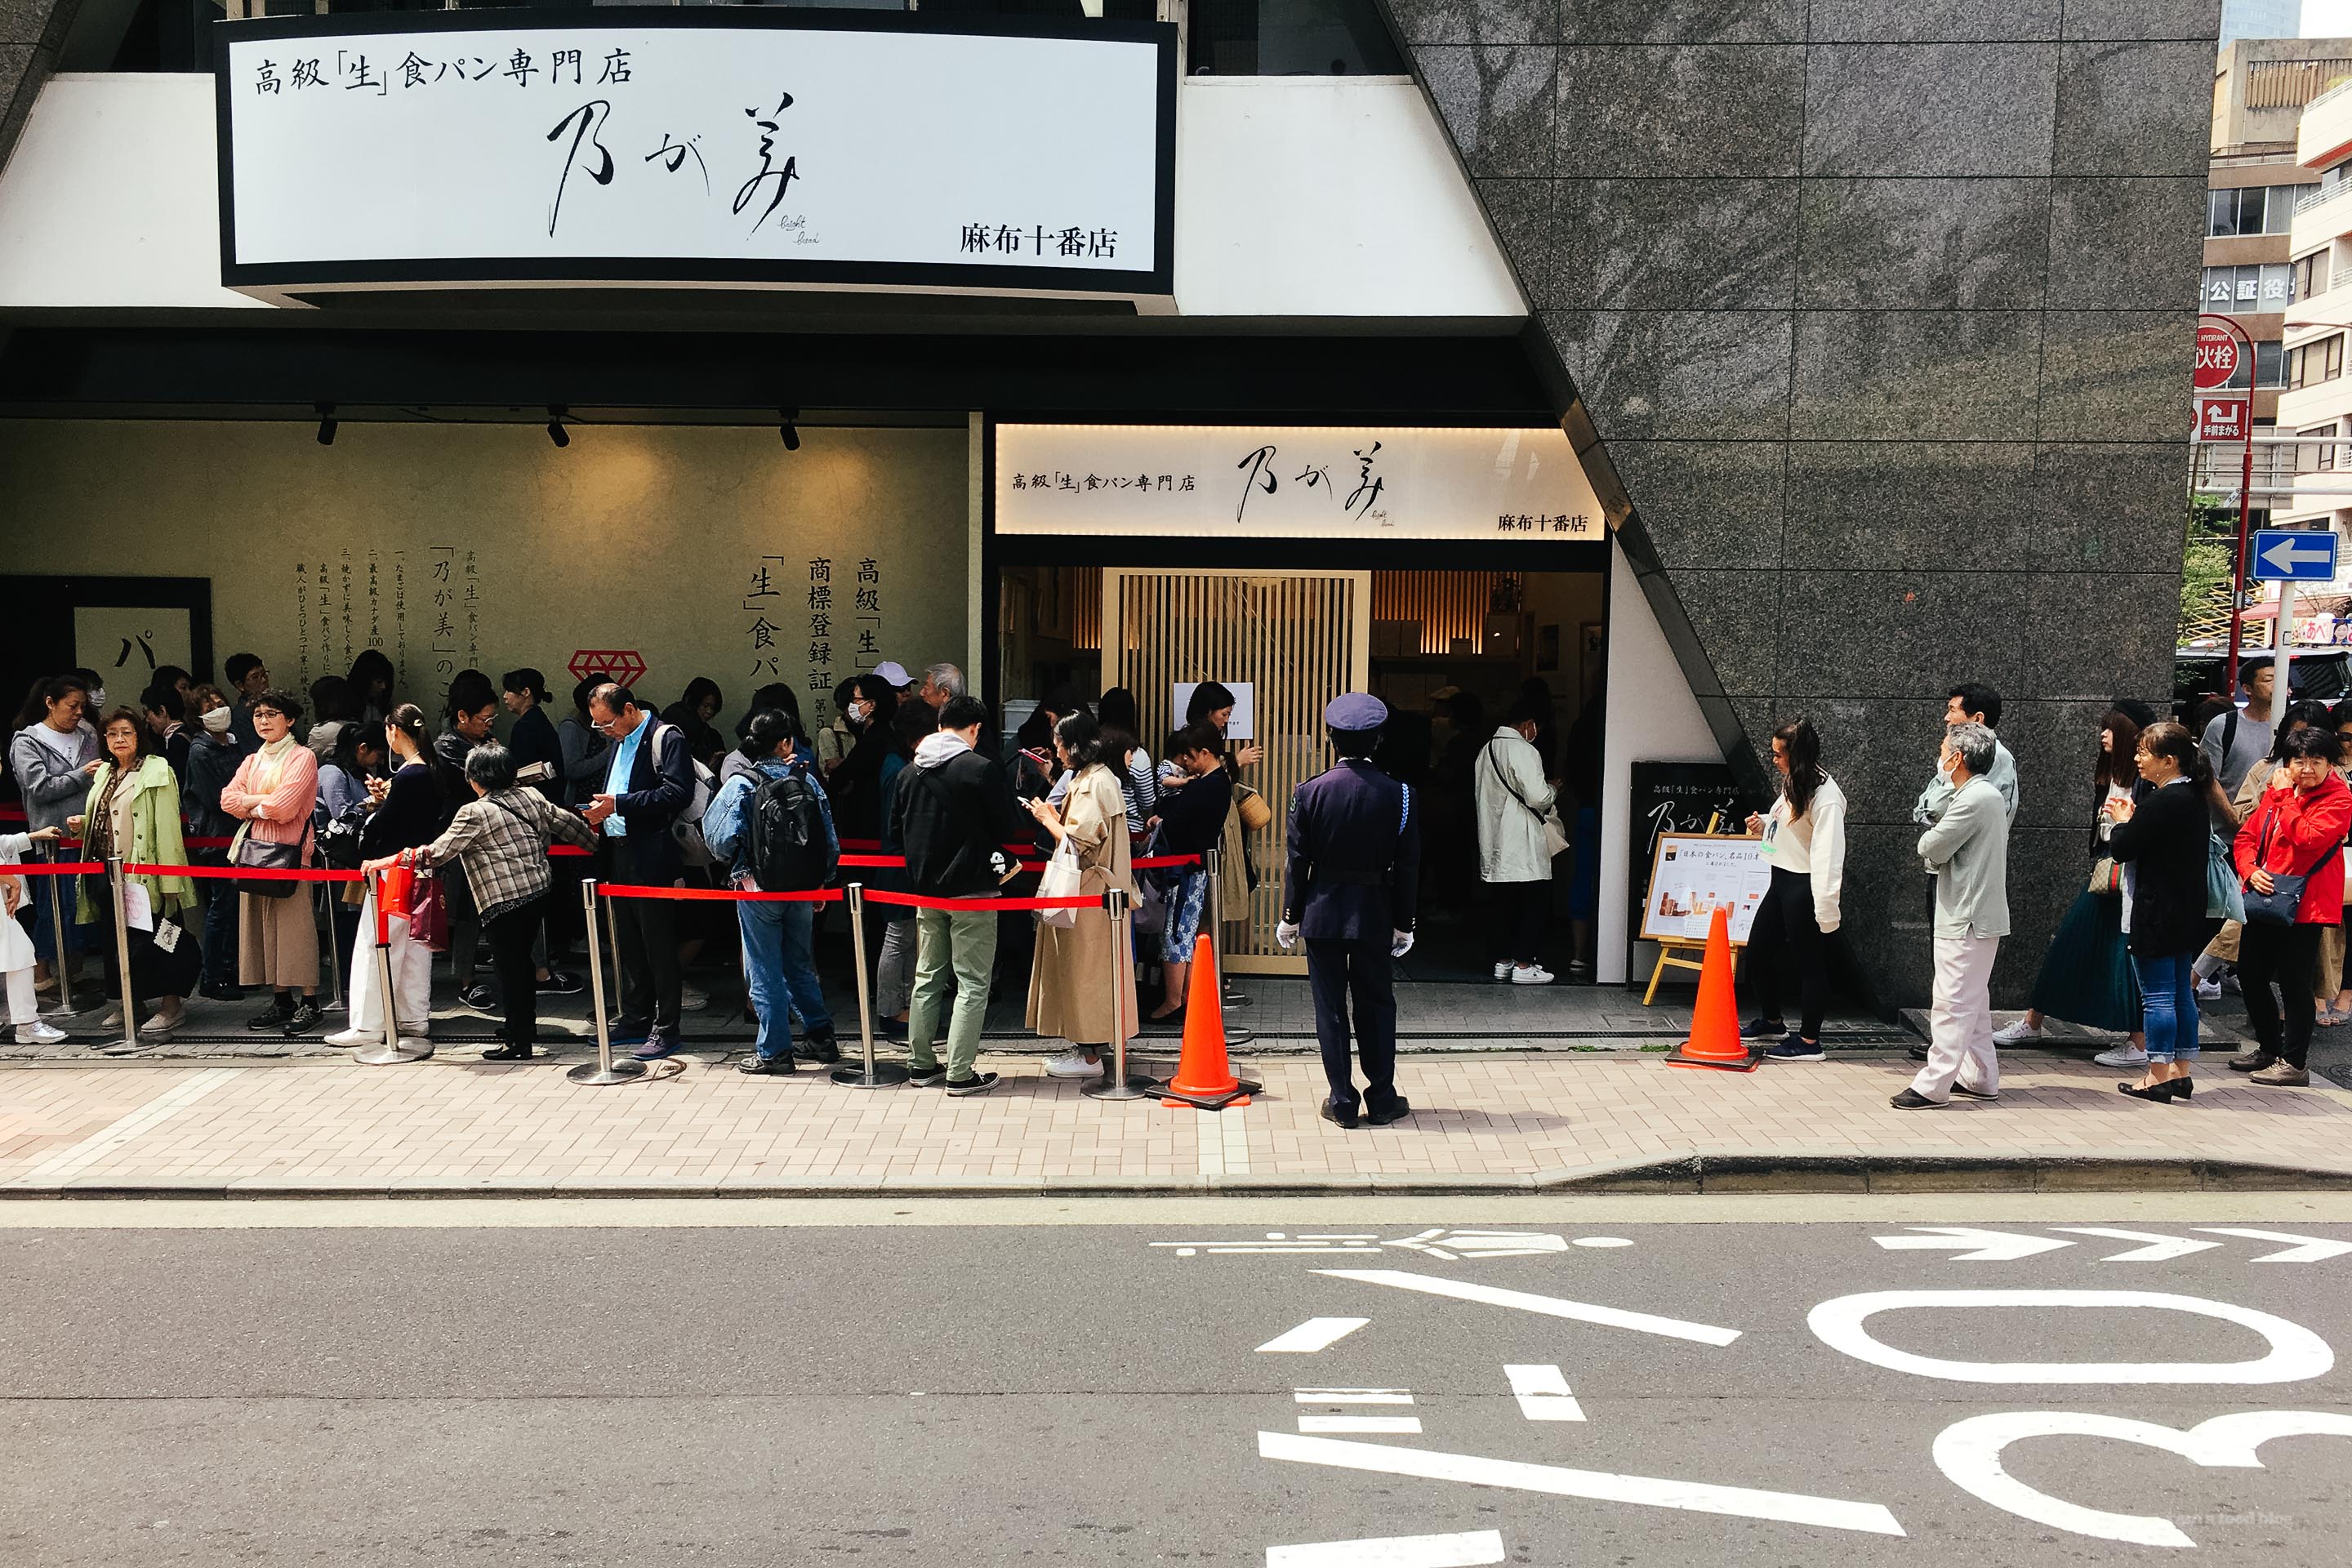 Japan?s Famous Nogami Shokupan Bread: People are Lining Up for Hours for this Fluffy White Bread